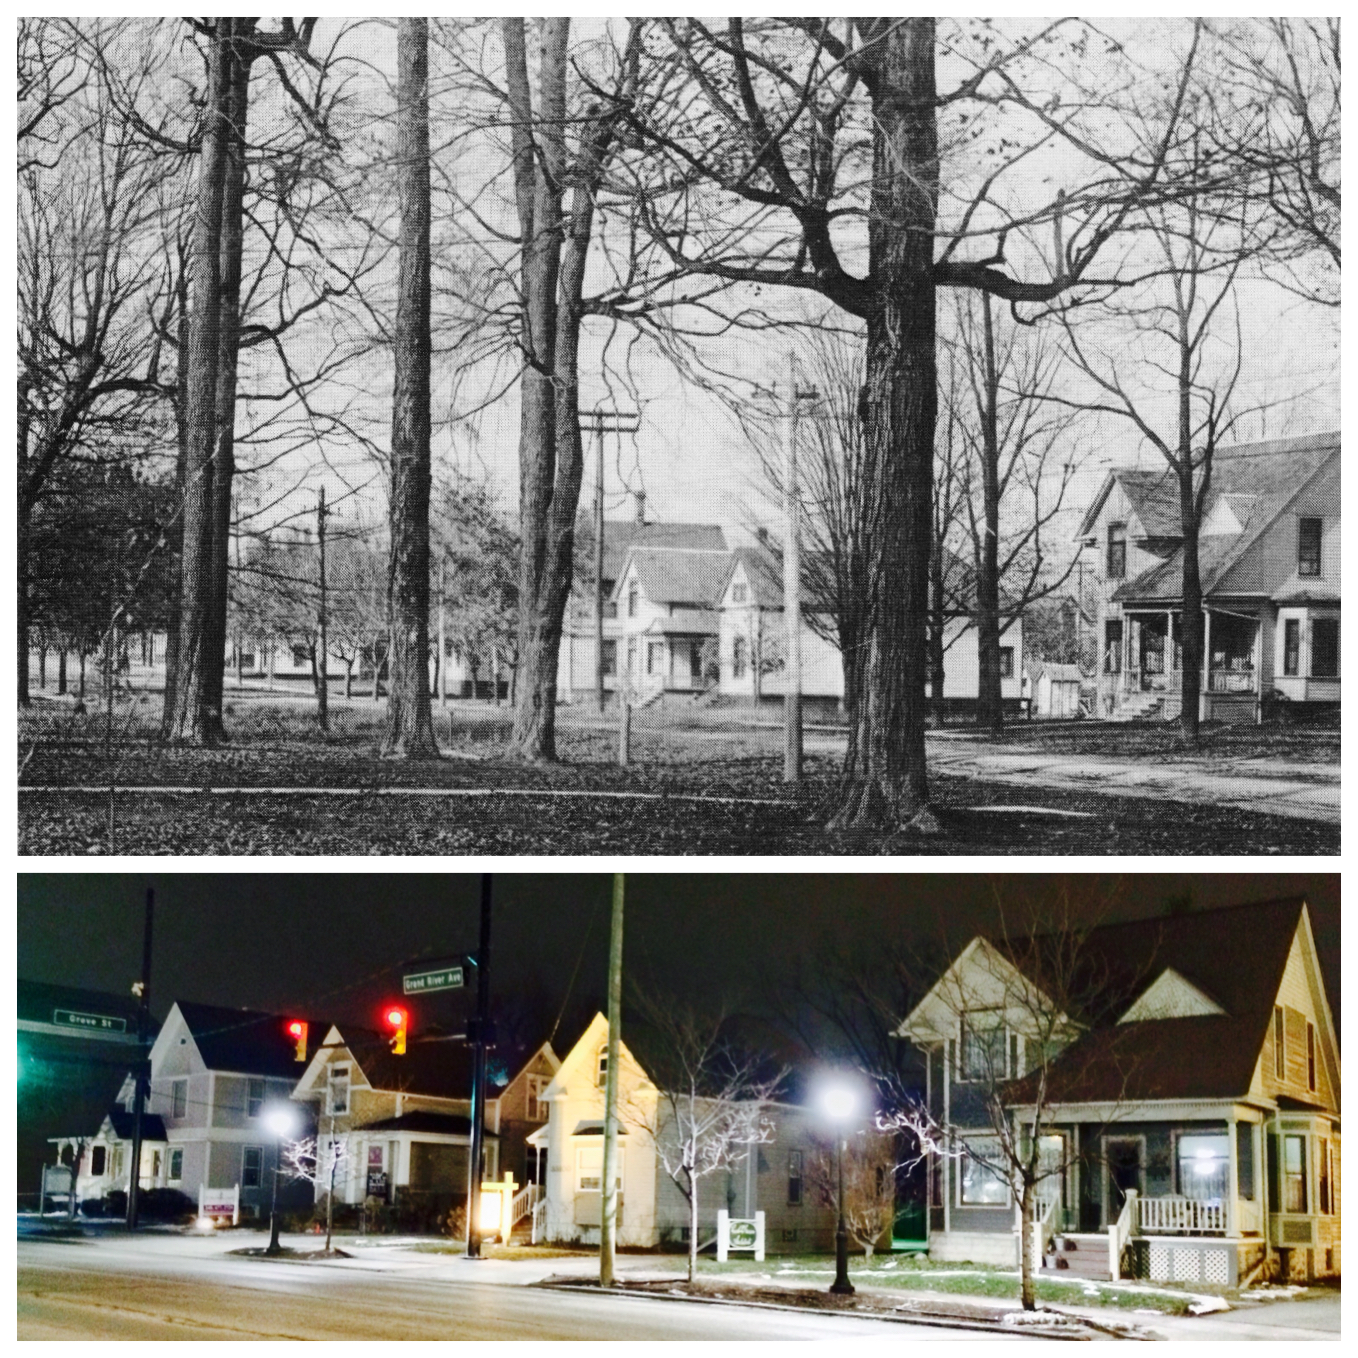 Queen Anne houses, then and now. Photo courtesy Preservation Farmington